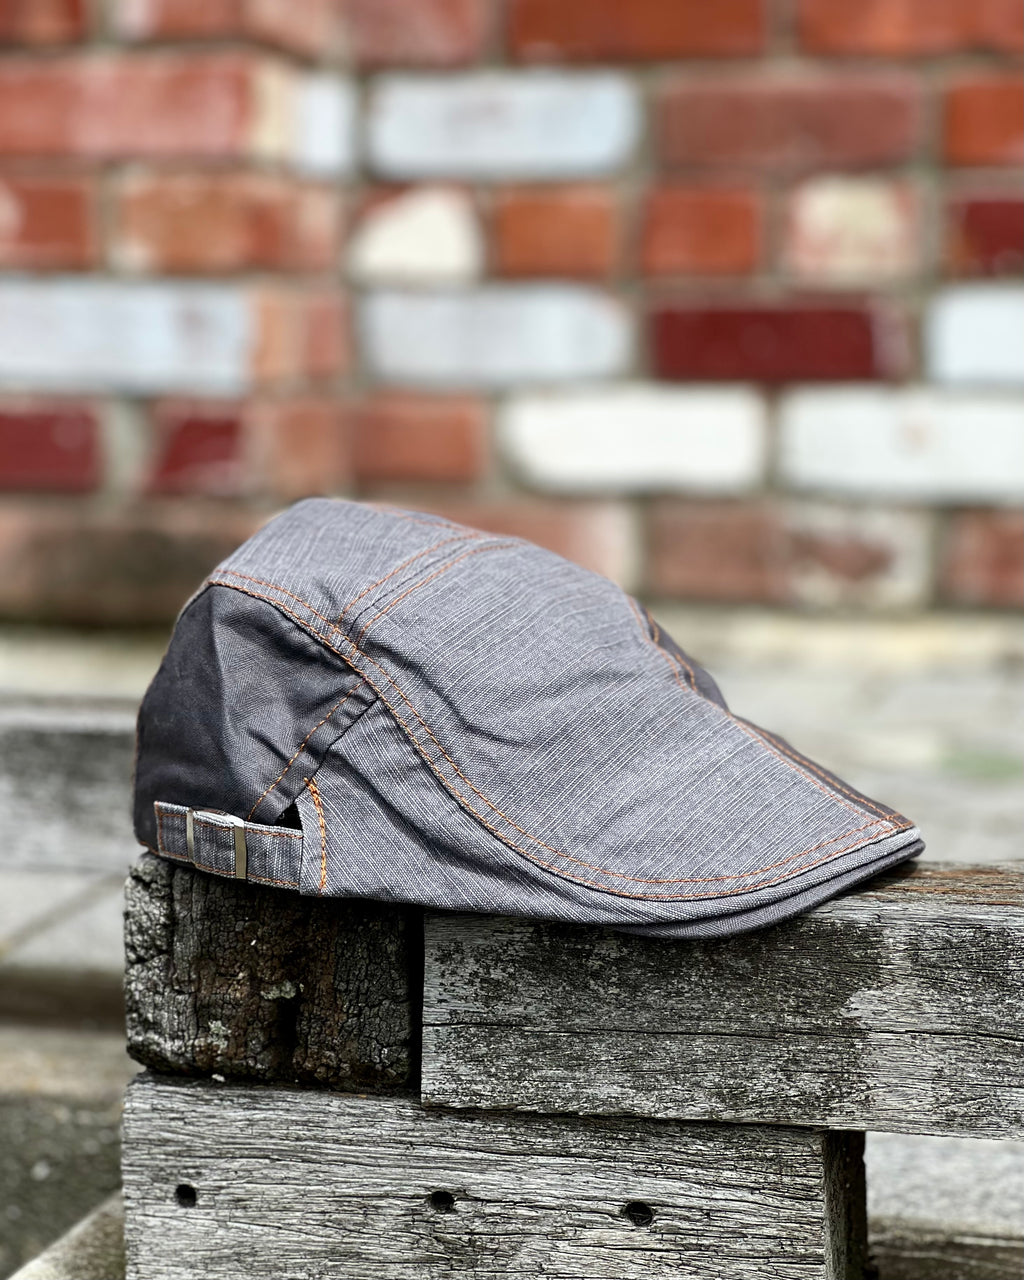 Retro-style flat cap by Electric Pukeko with side adjustment